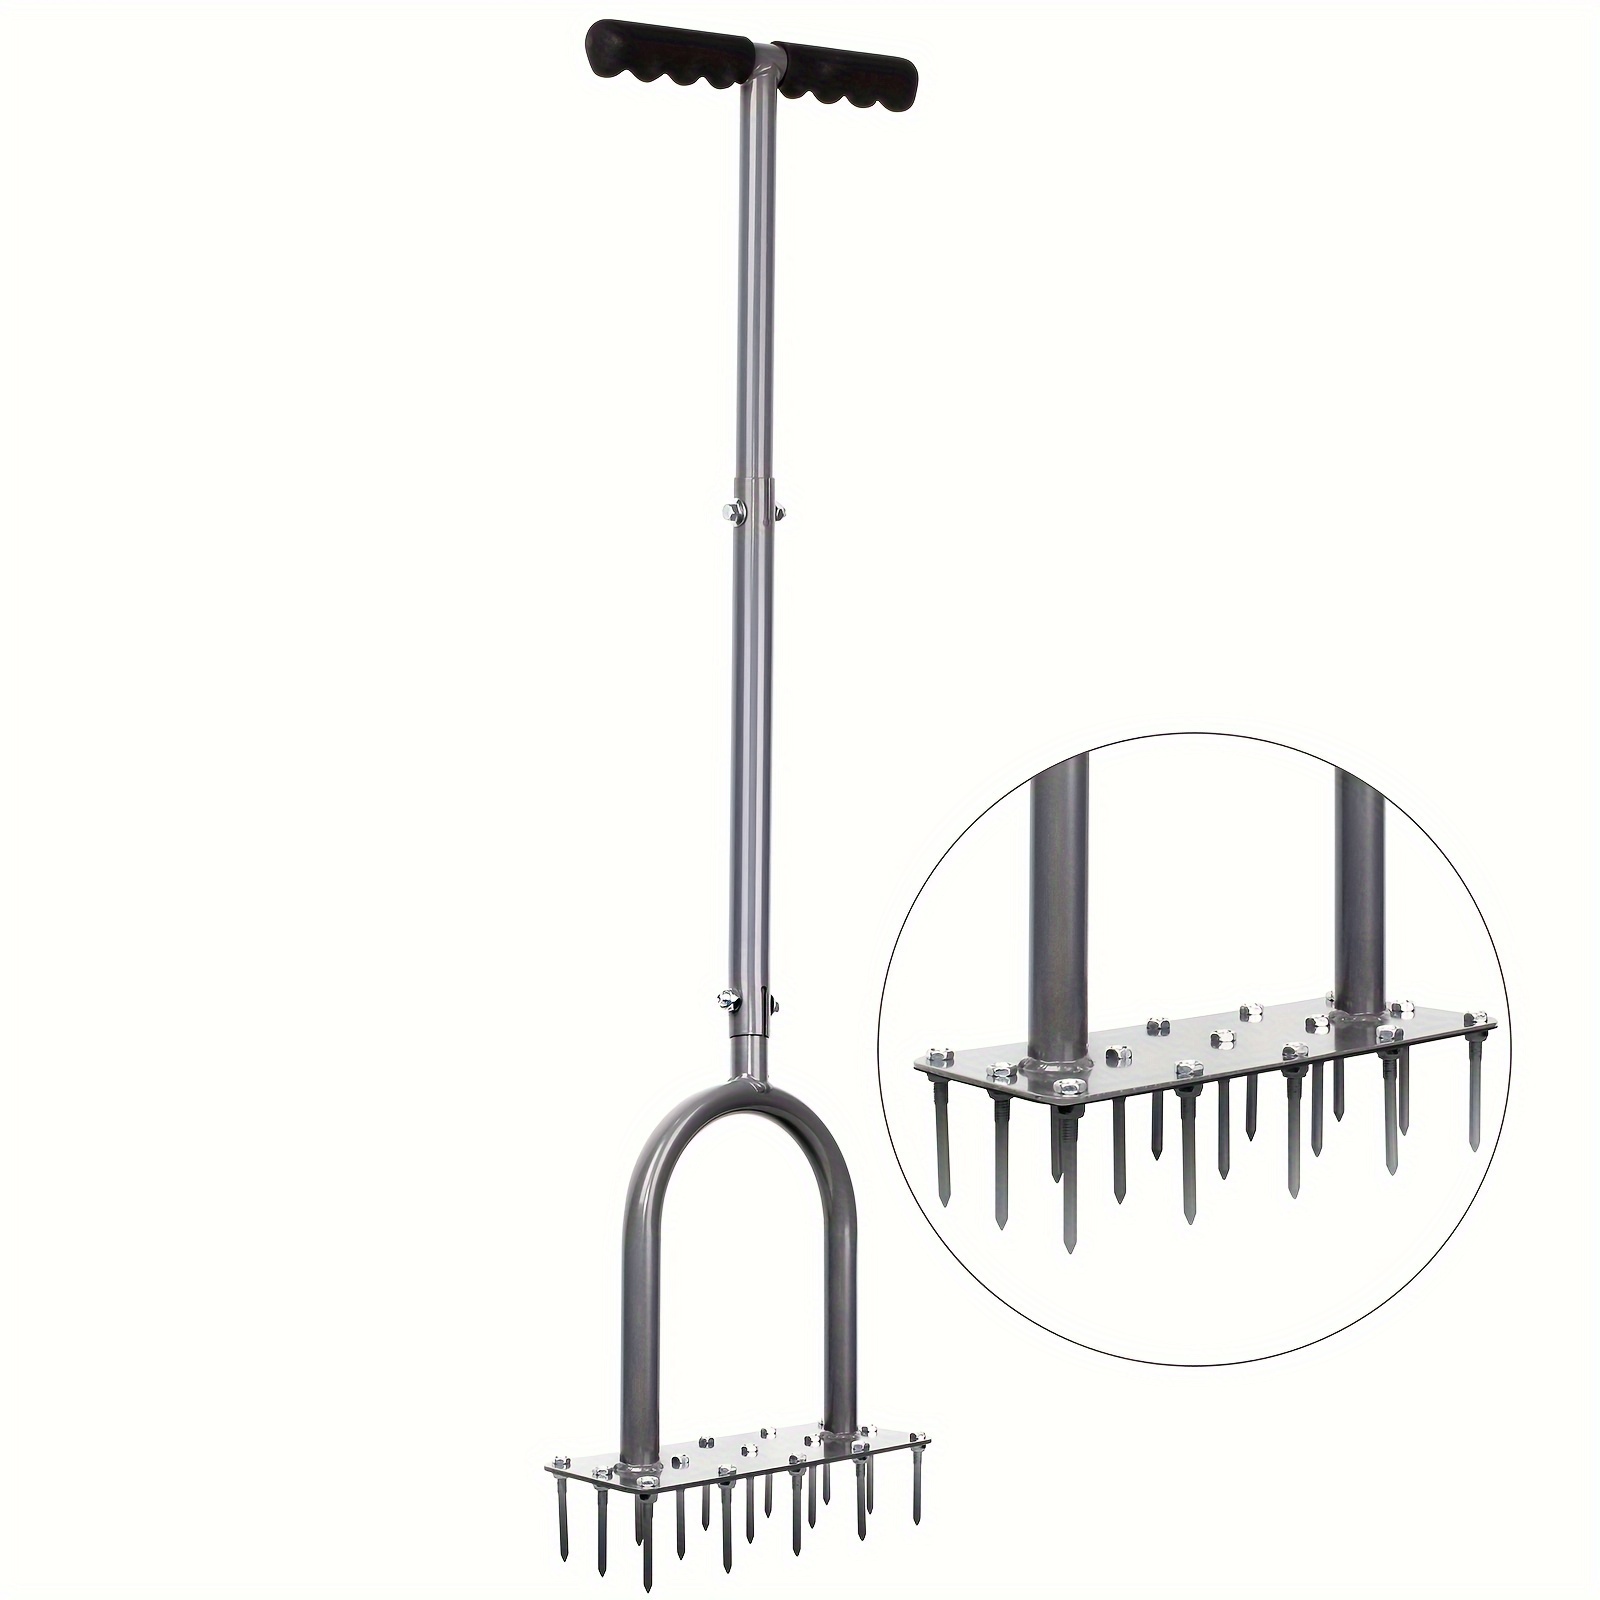 

1 Pack, Lawn Aerator Spike Metal Manual Dethatching Soil Aerating Lawn With 15 Iron Spikes, Pre-assembled Grass Aerator Tools For Yard, Lawn Aeration, Garden Tool, Revives Lawn Health, Patent Pending